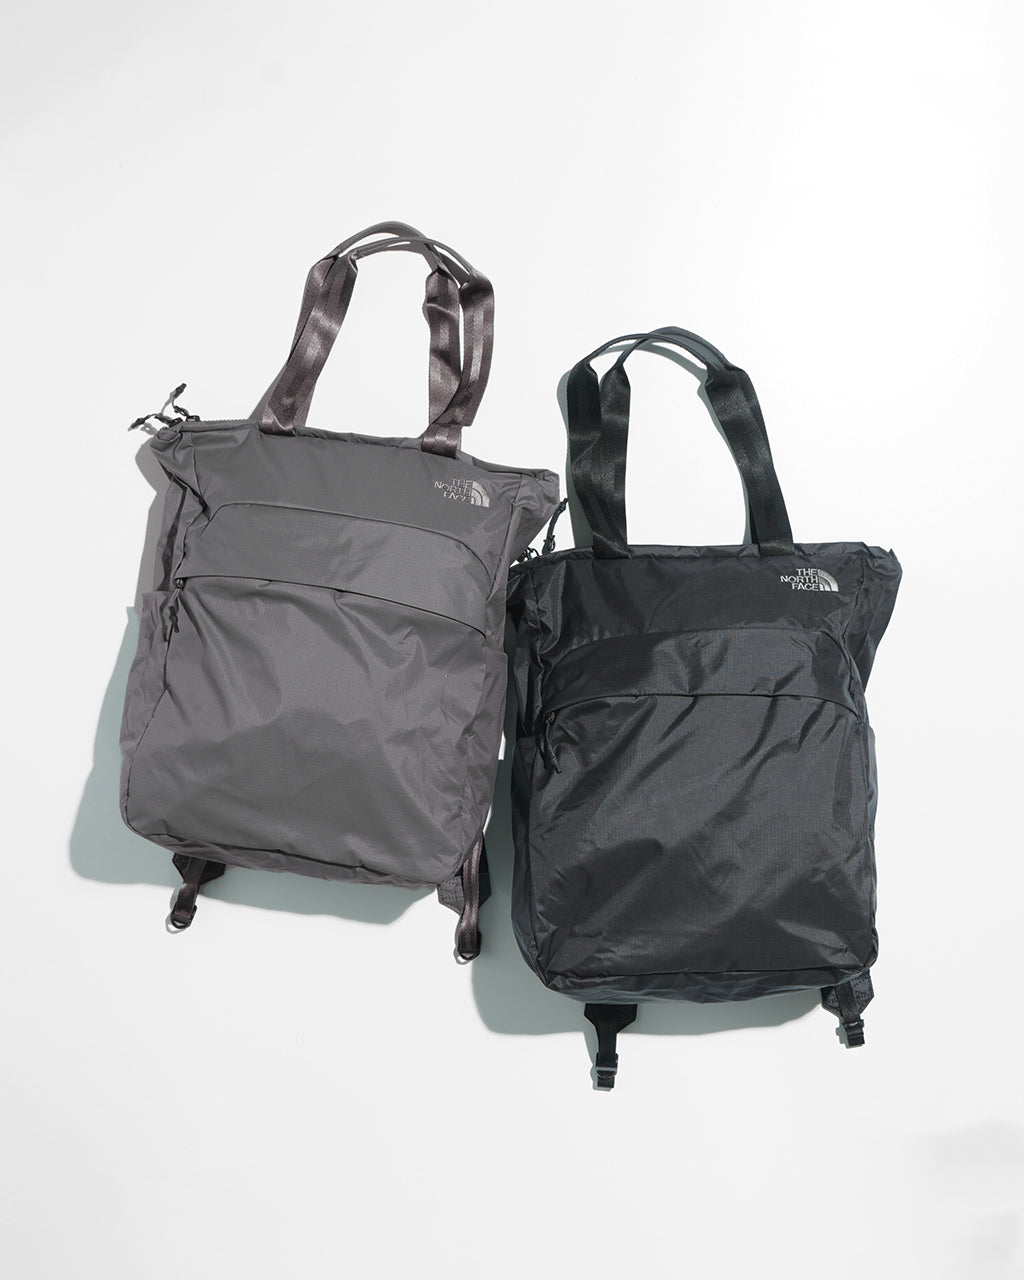 THE NORTH FACE ノースフェイス グラム トート Glam Tote 2way トートバッグ バックパック リュックサック 18L   NM32359【送料無料】